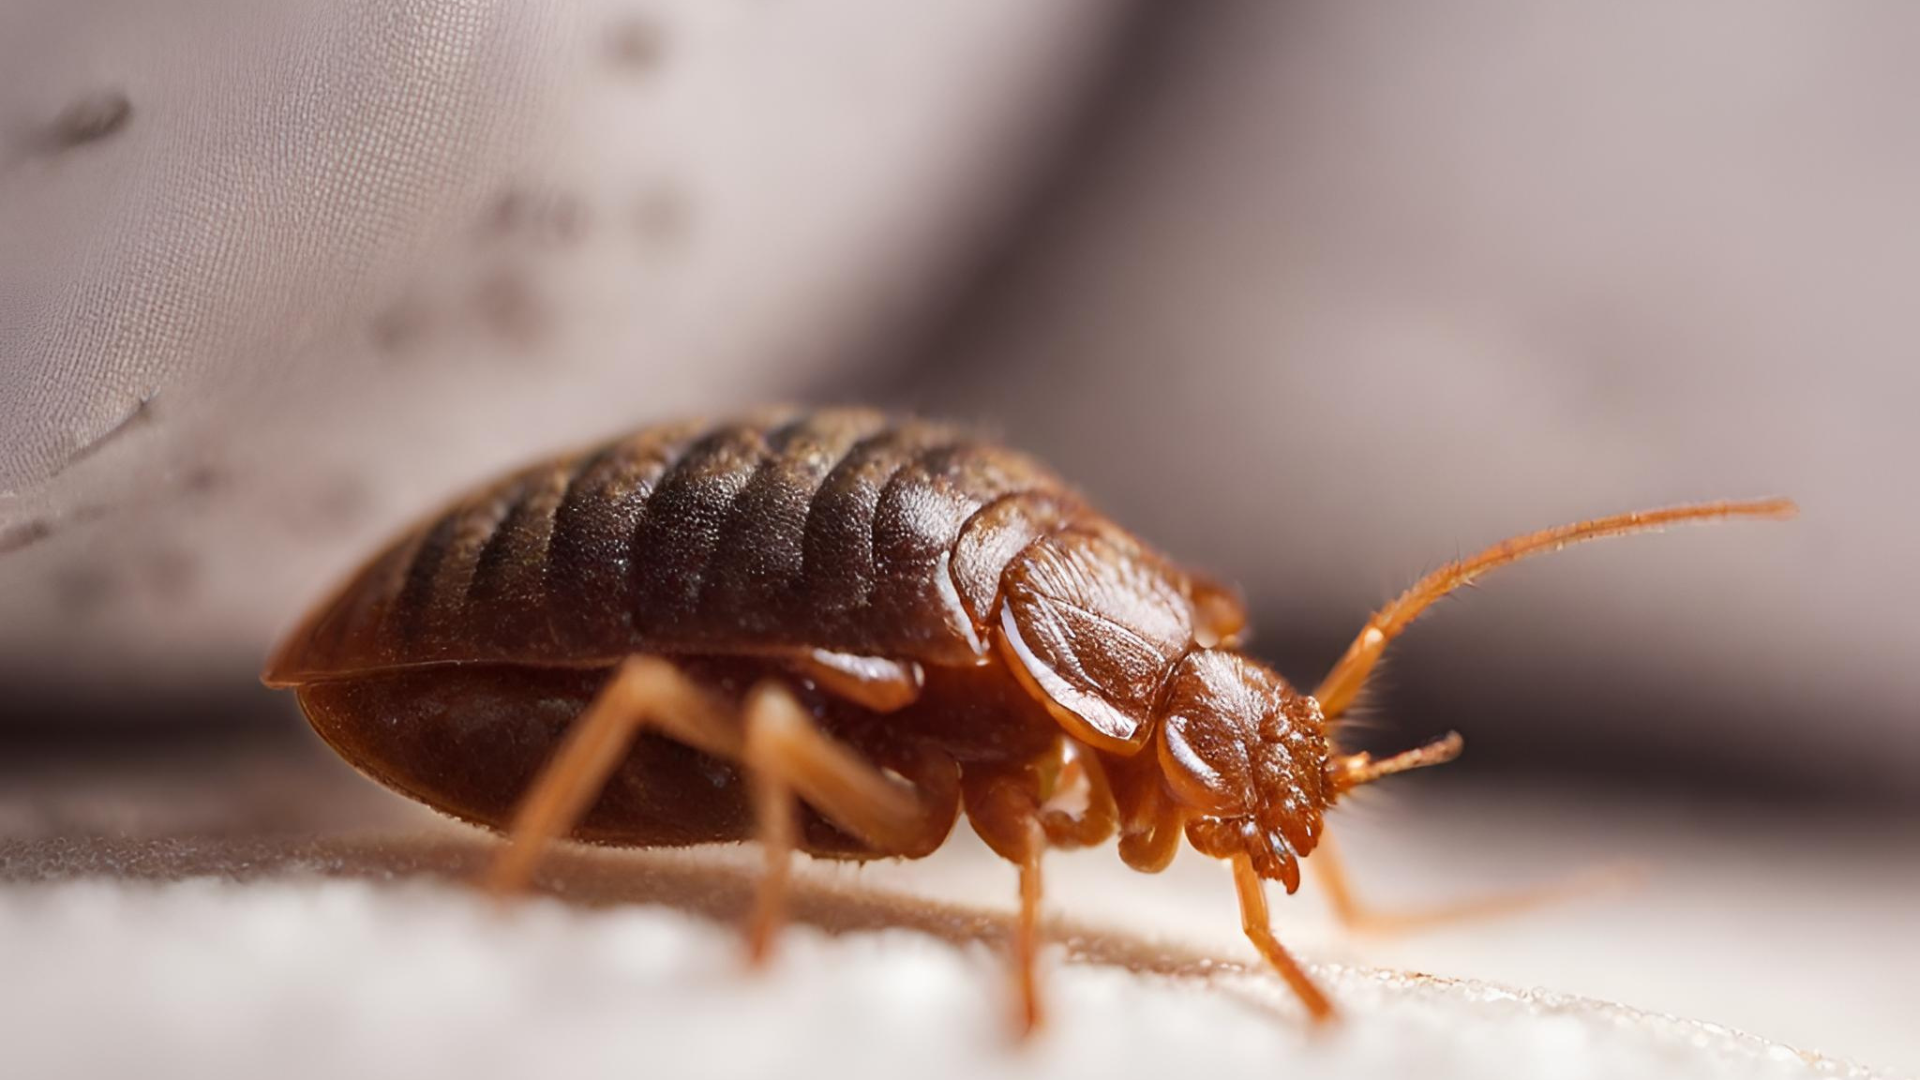 signs of a bed bug infestation is noticing bite marks on your skin